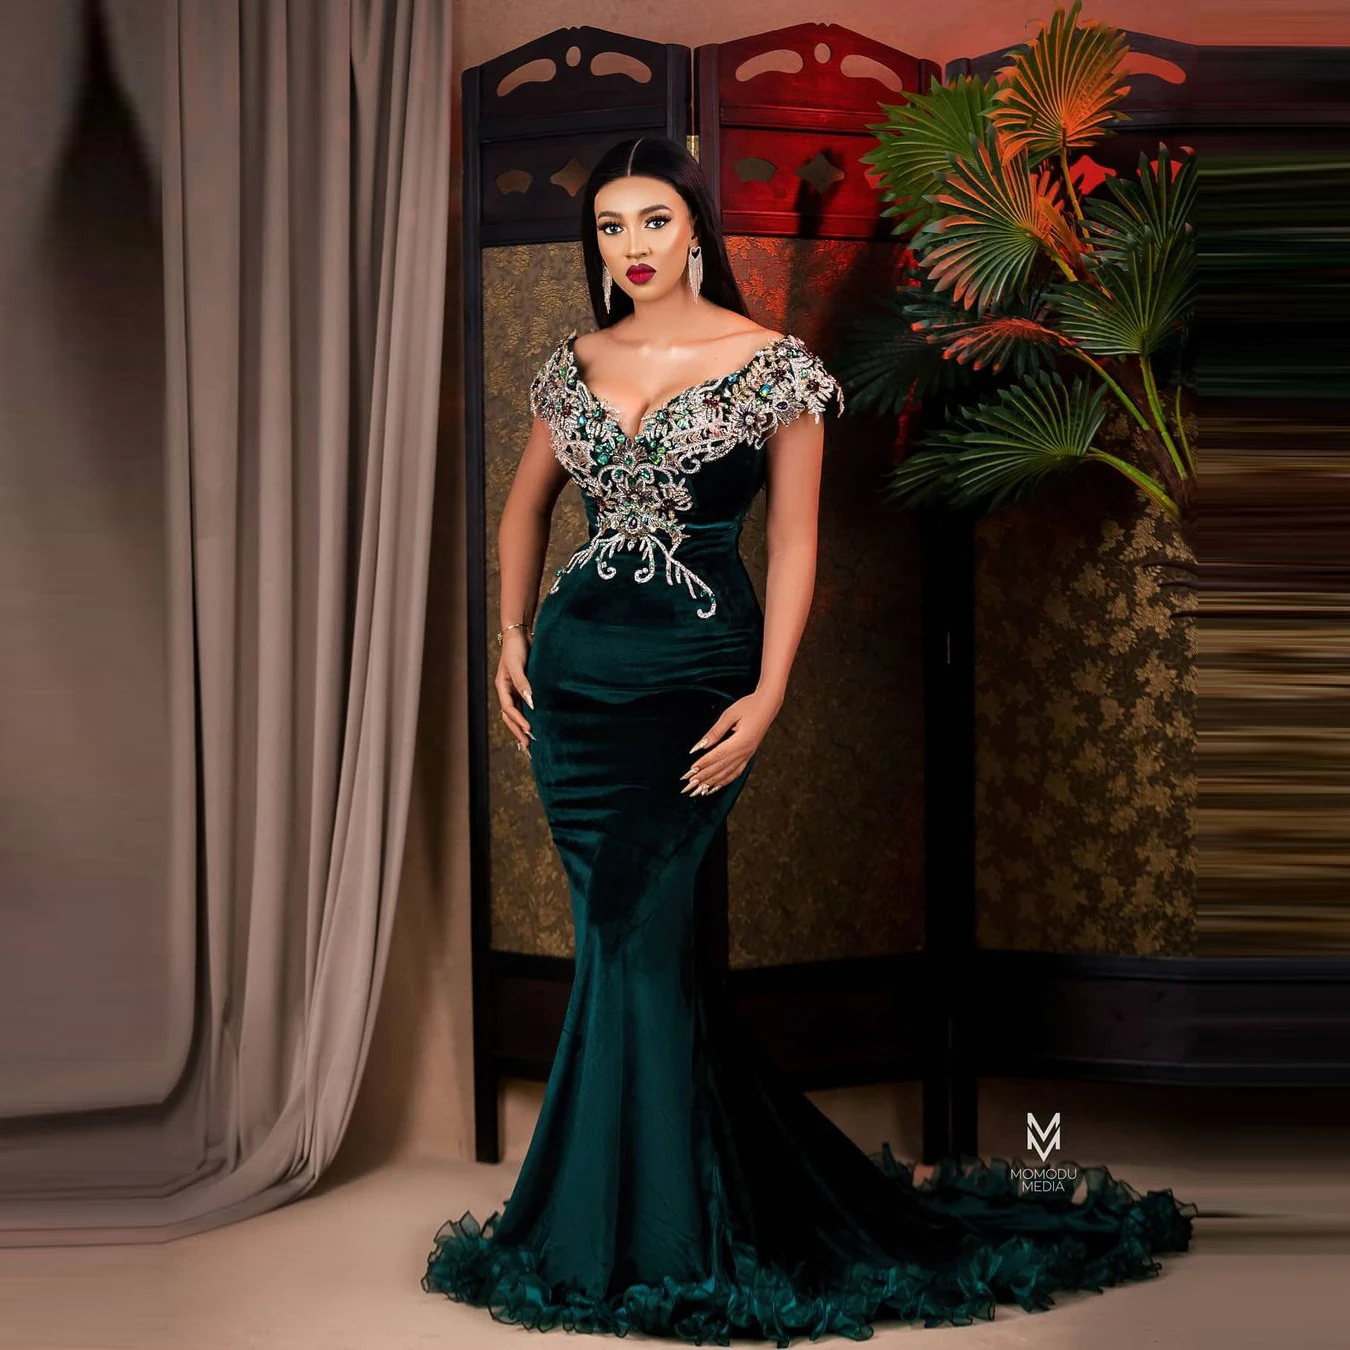 

Green Velvet Mermaid Prom Dresses Aso Ebi Style V Neck Crystals Beaded With Train Long Luxury South Africa Evening Gowns